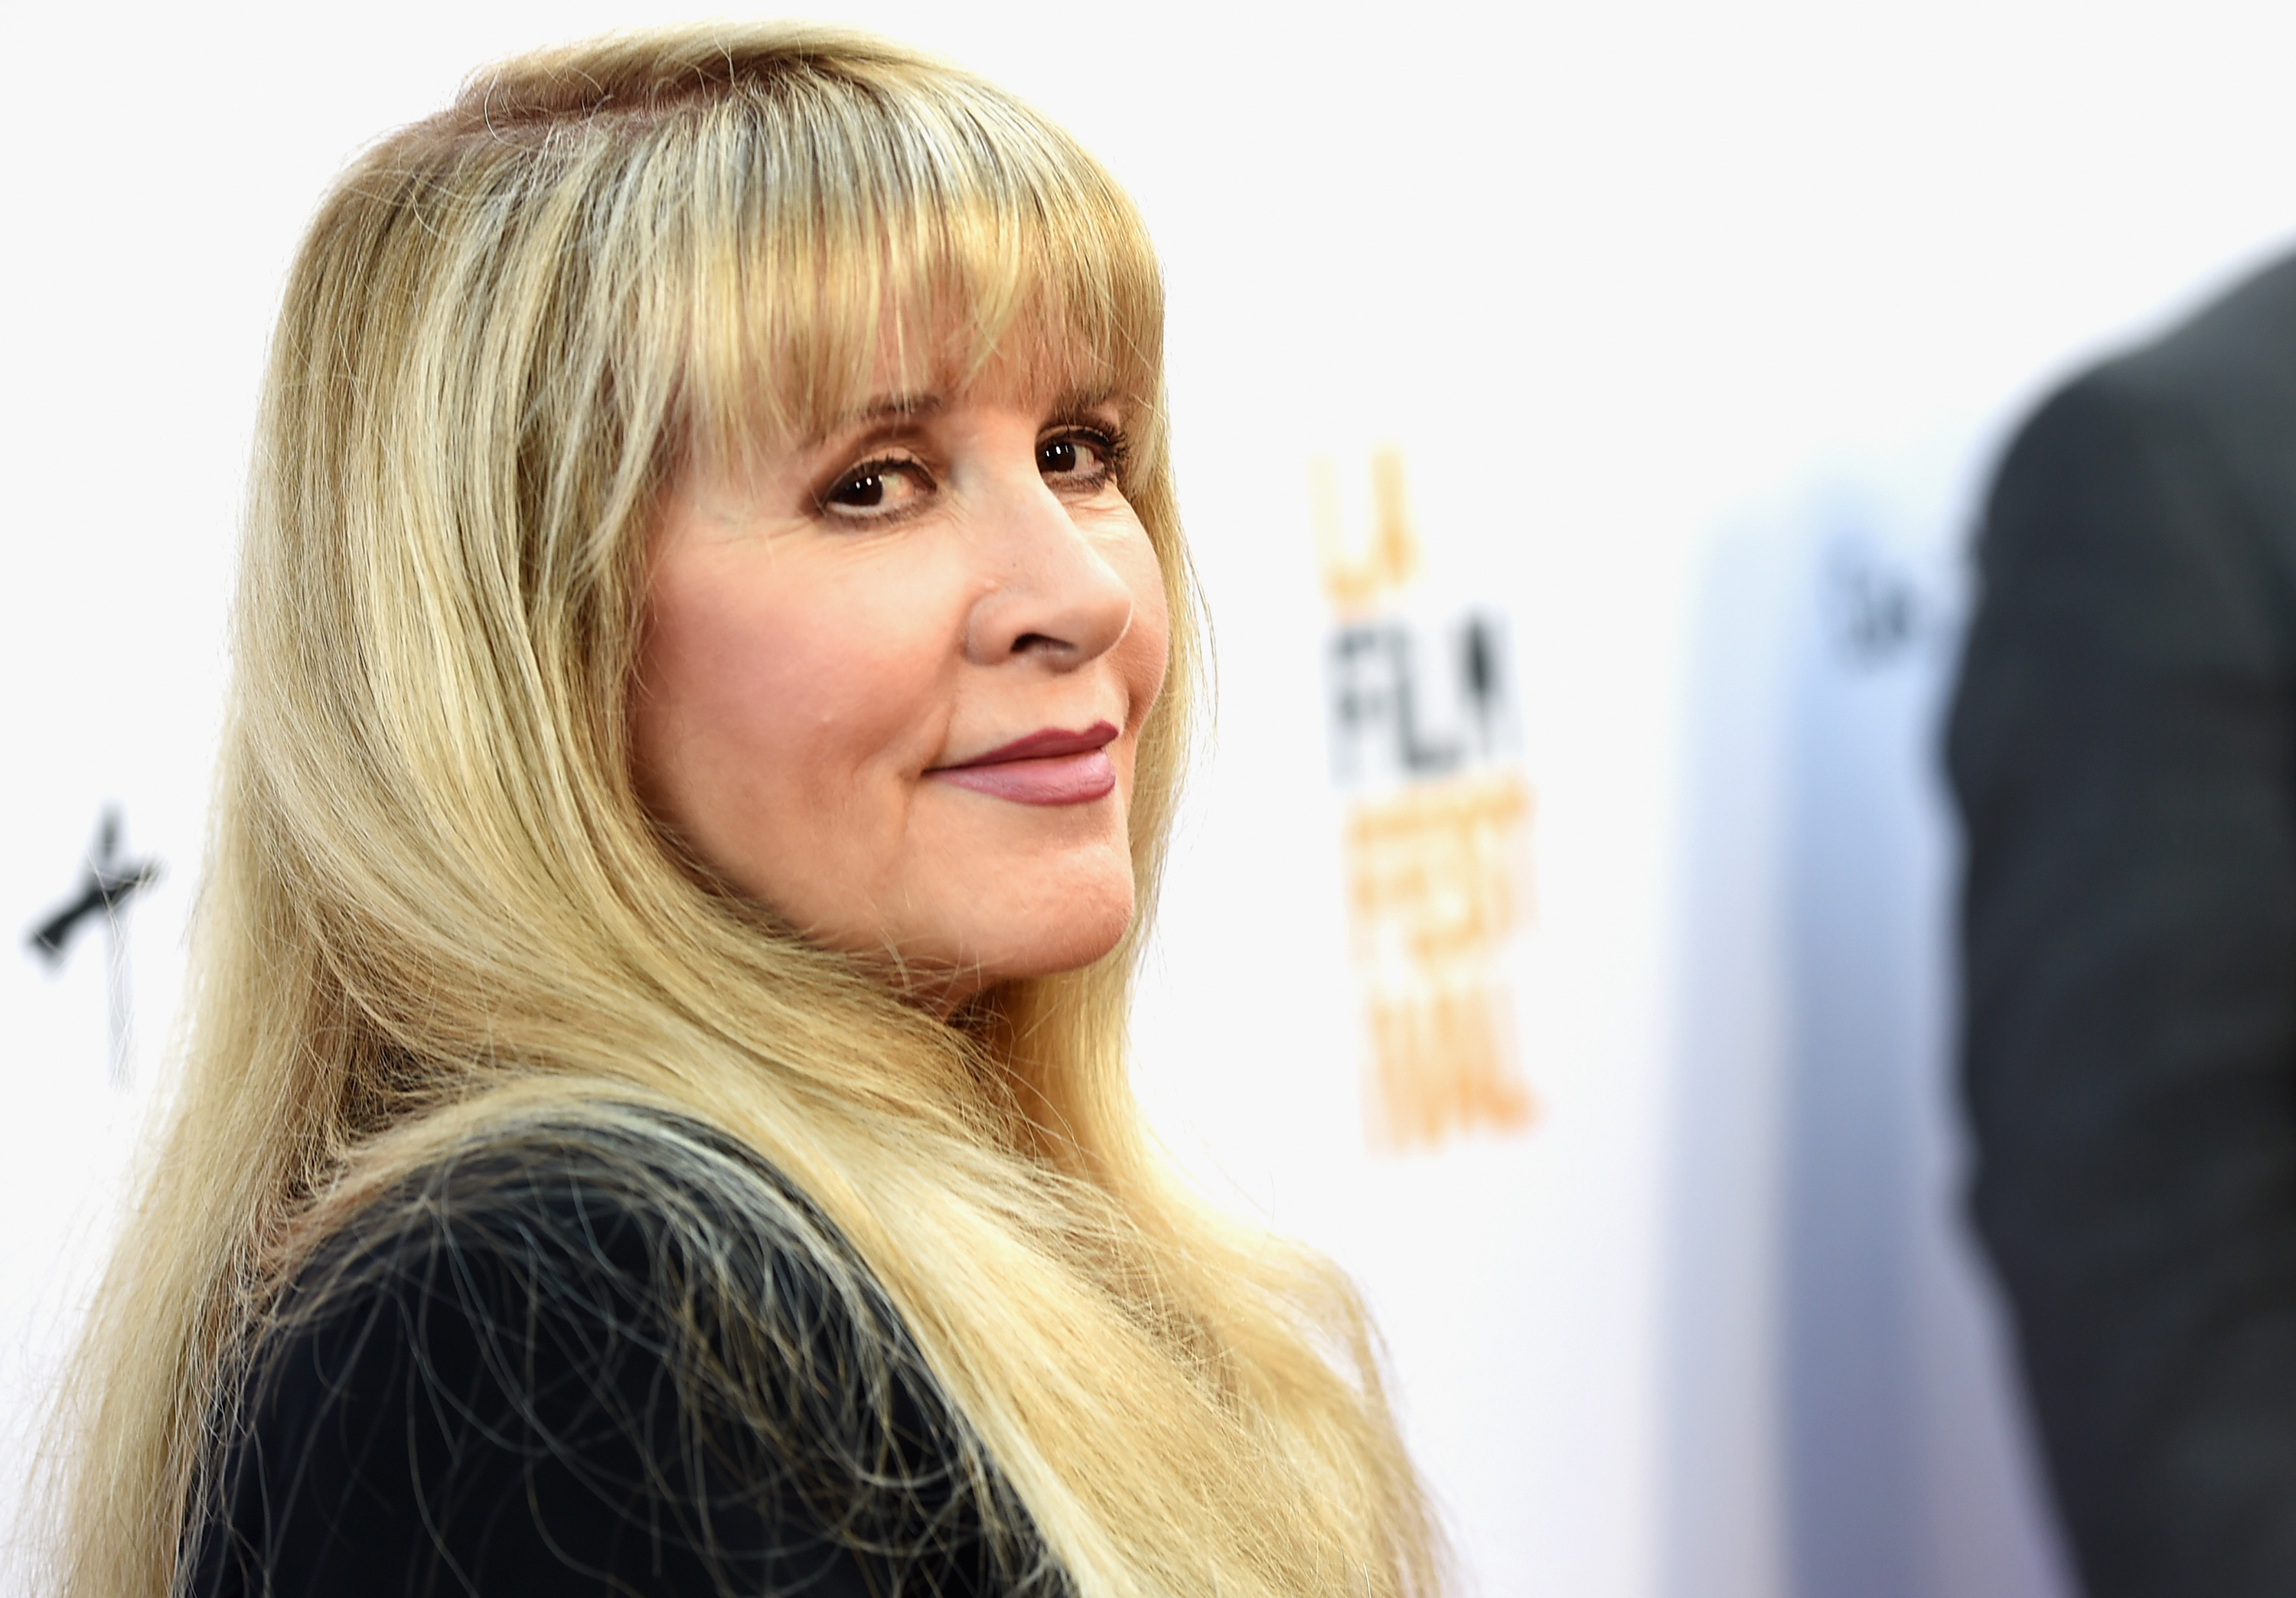 Stevie Nicks wears a black outfit and stands in front of a white background.